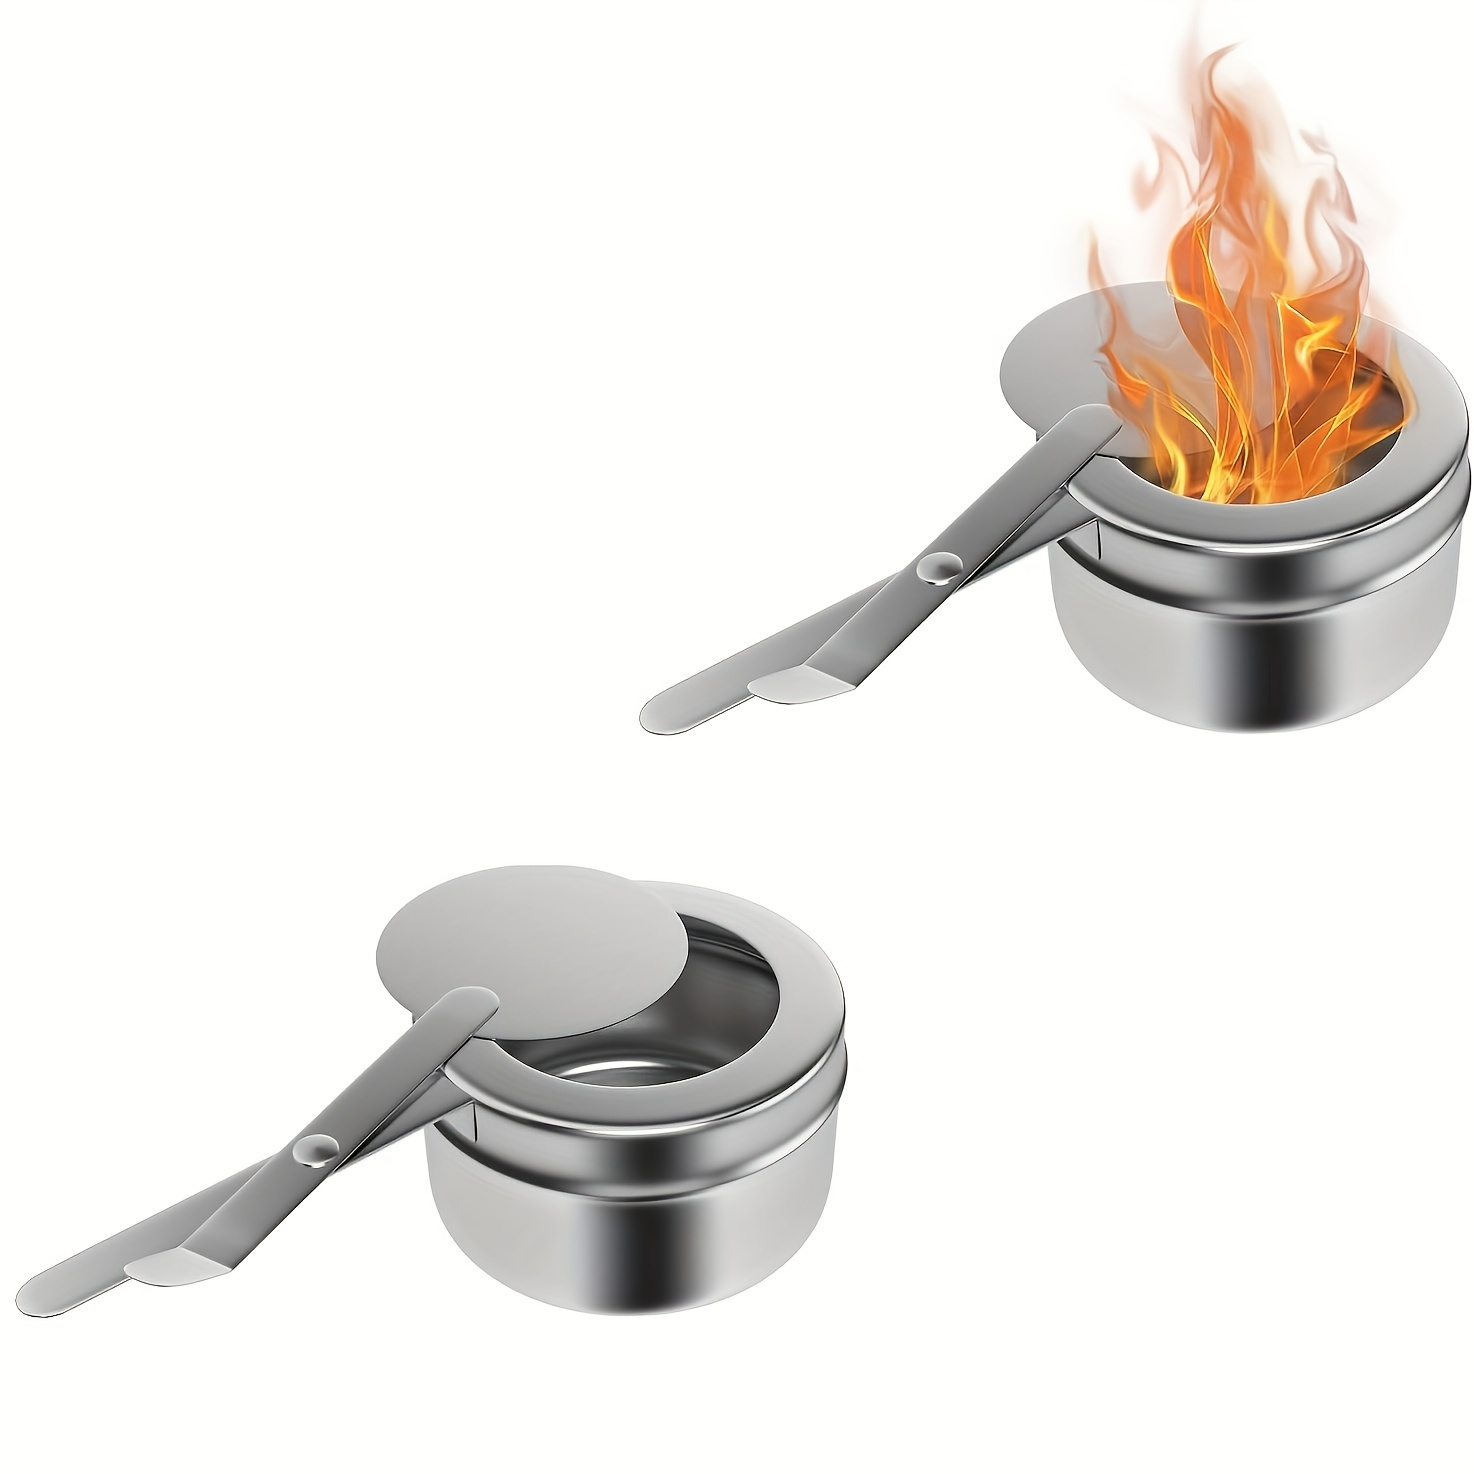 

2pack Stainless Steel Fuel Holders, Chafing Fuel Holders With Cover For Chafing Dishes, Fuel Holder For Chafing Dish, And Buffet, Barbecue Party Events